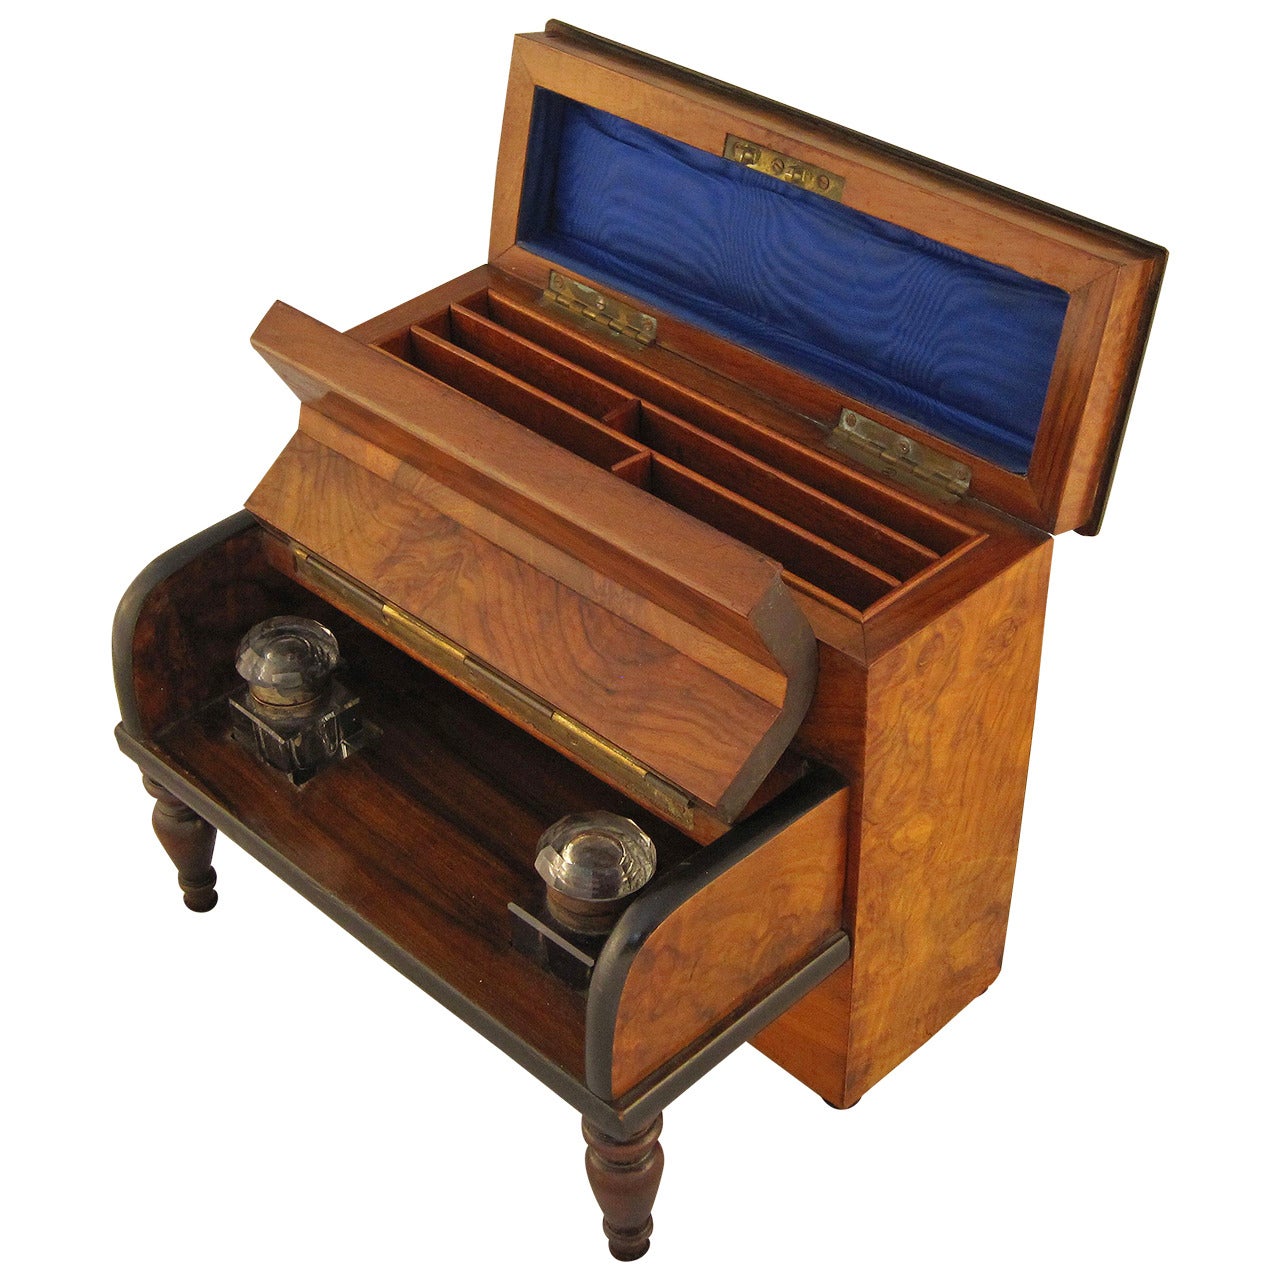 English Desk Set with Inkwells and Stationery Box